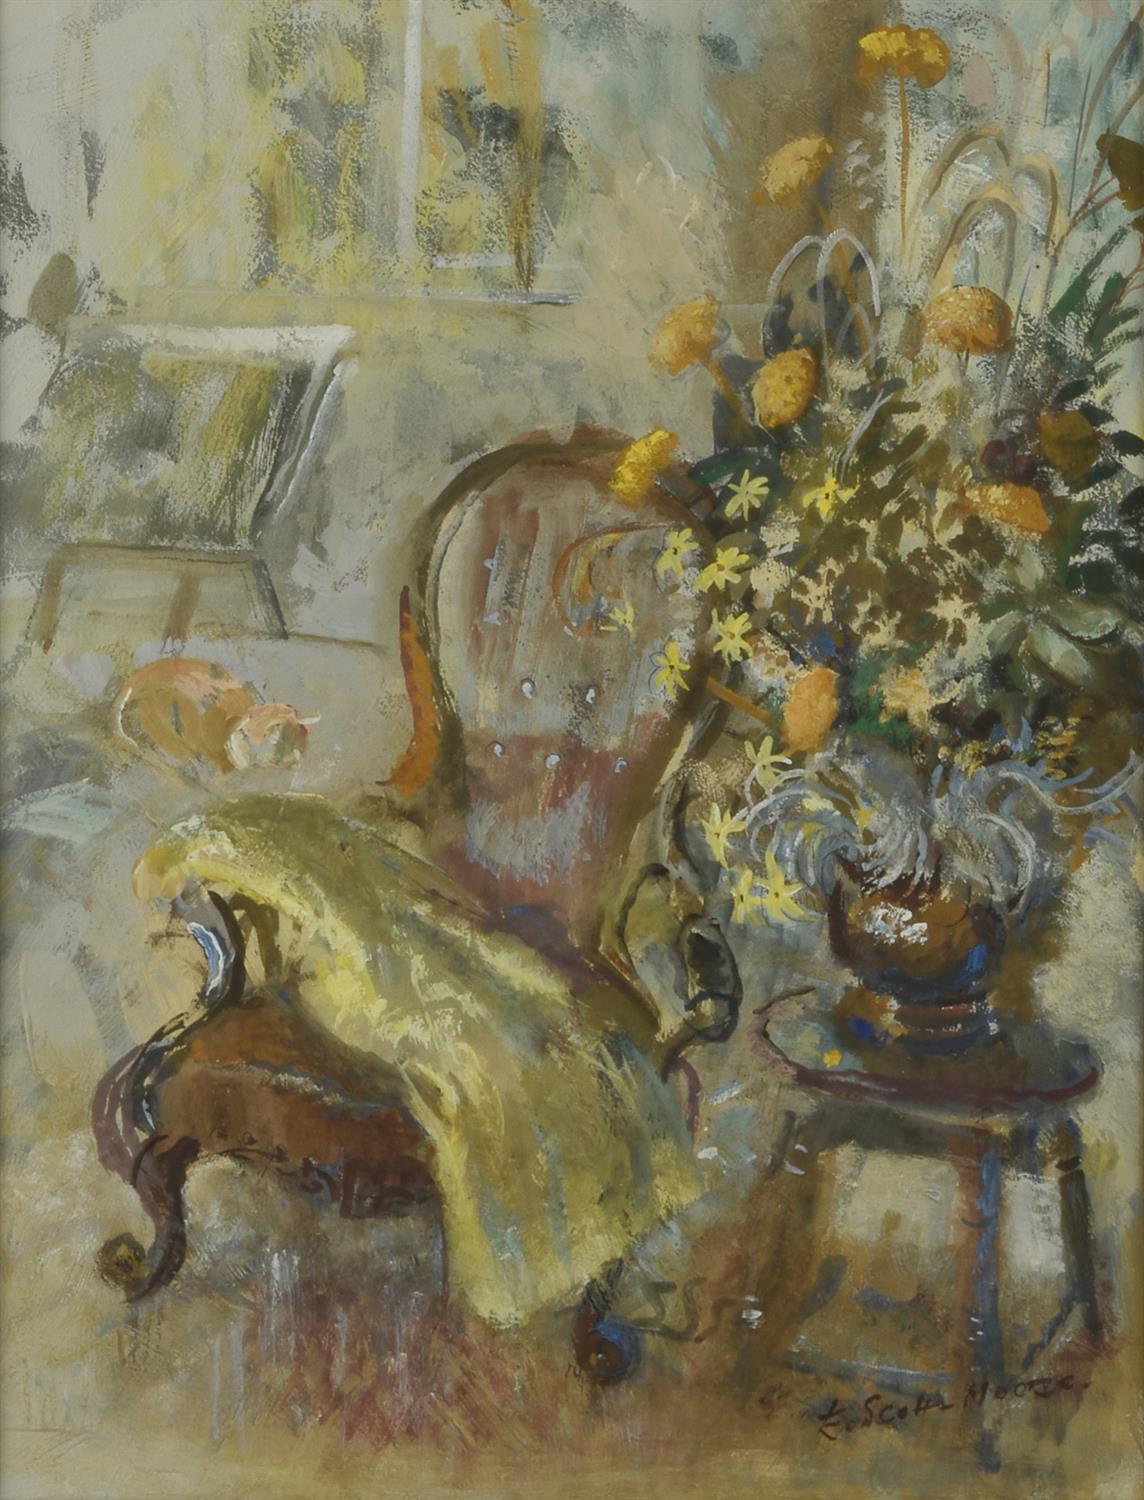 Elizabeth Scott-Moore (British 1902-1993), Interior scene with chair, cat and a vase of flowers